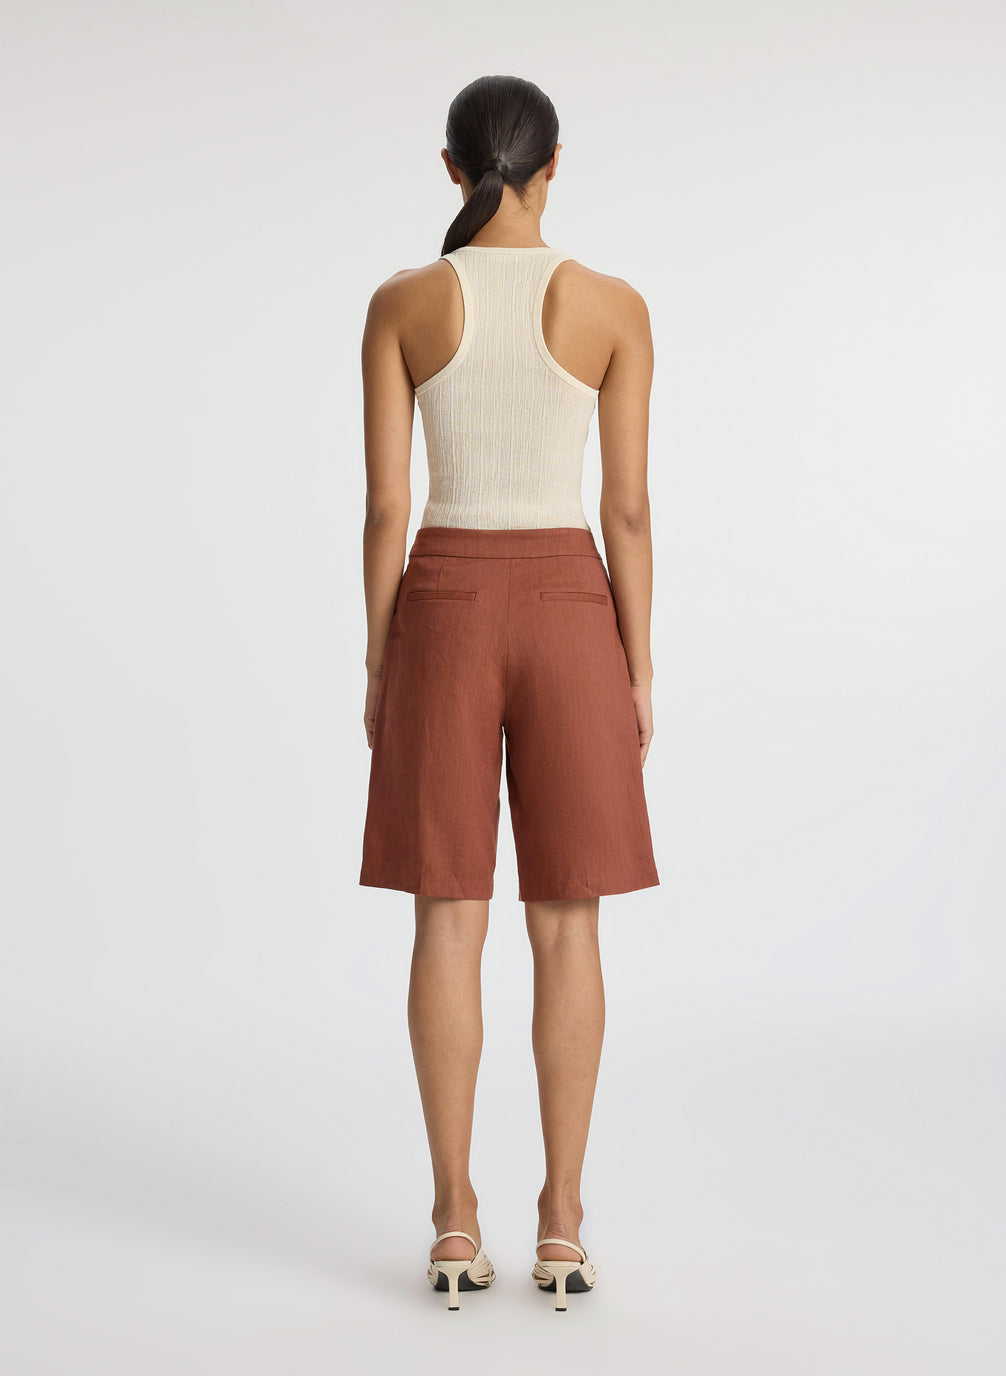 back view of woman wearing beige tank top and brown shorts